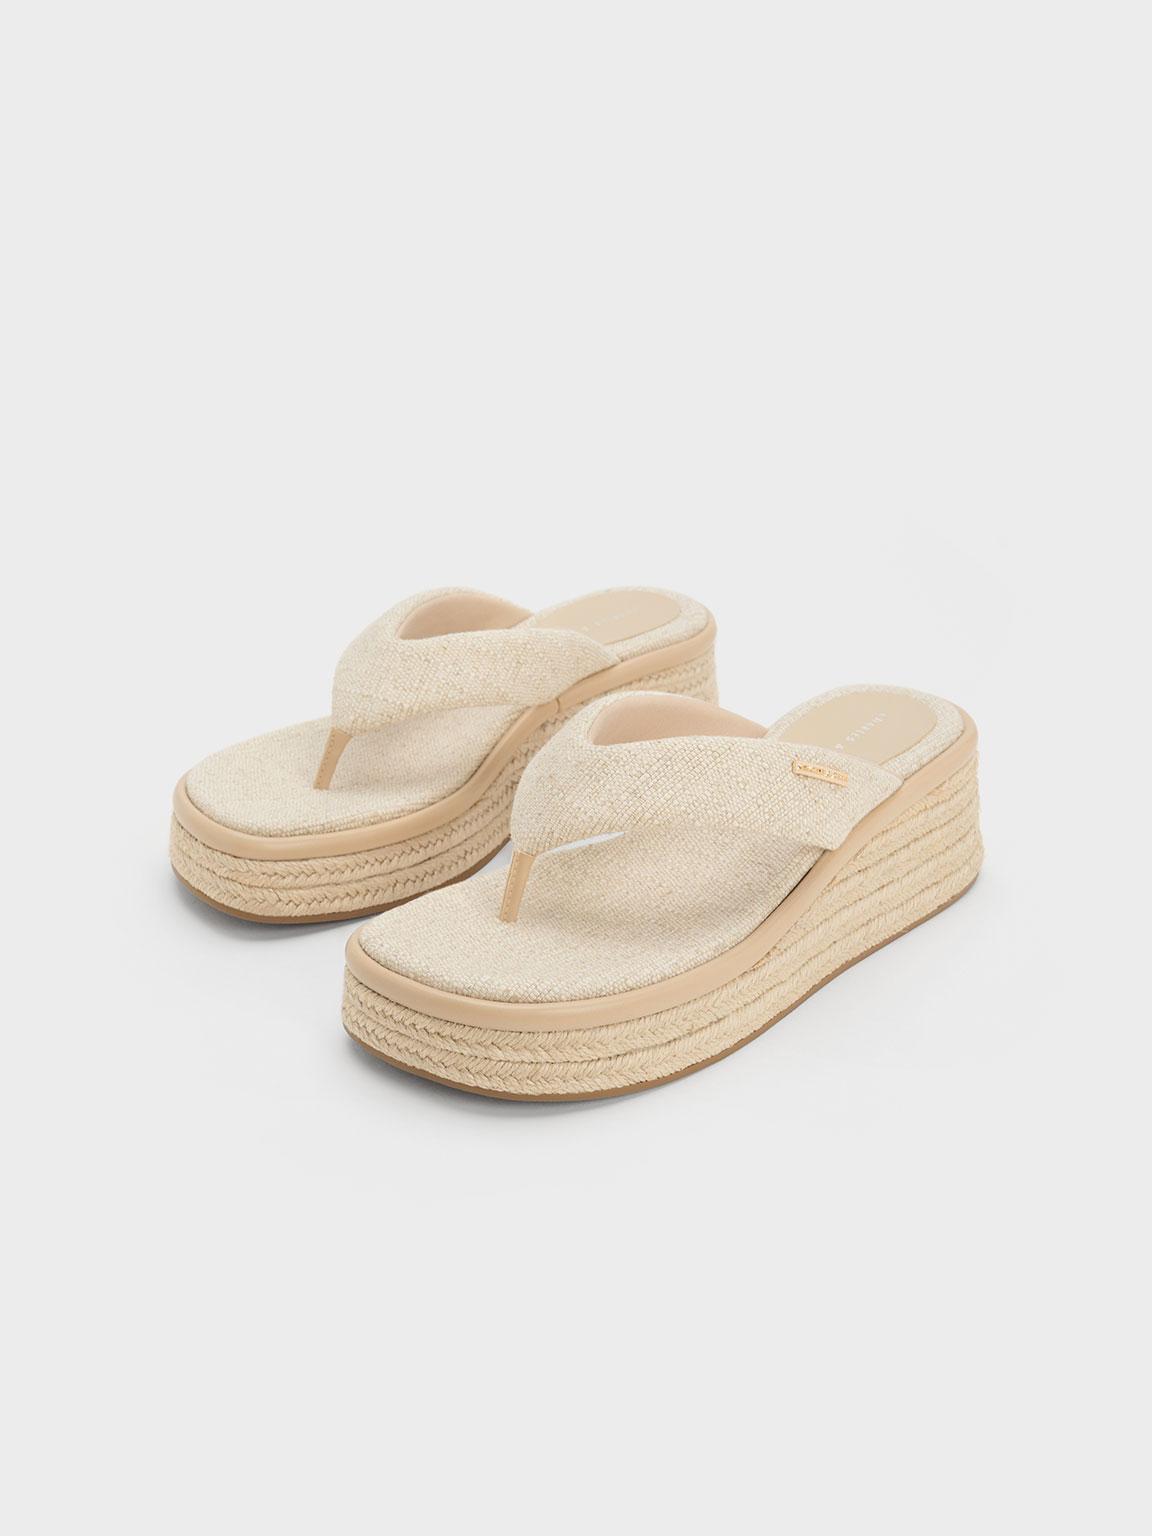 Charles & Keith Linen Espadrille Thong Sandals in Natural | Lyst